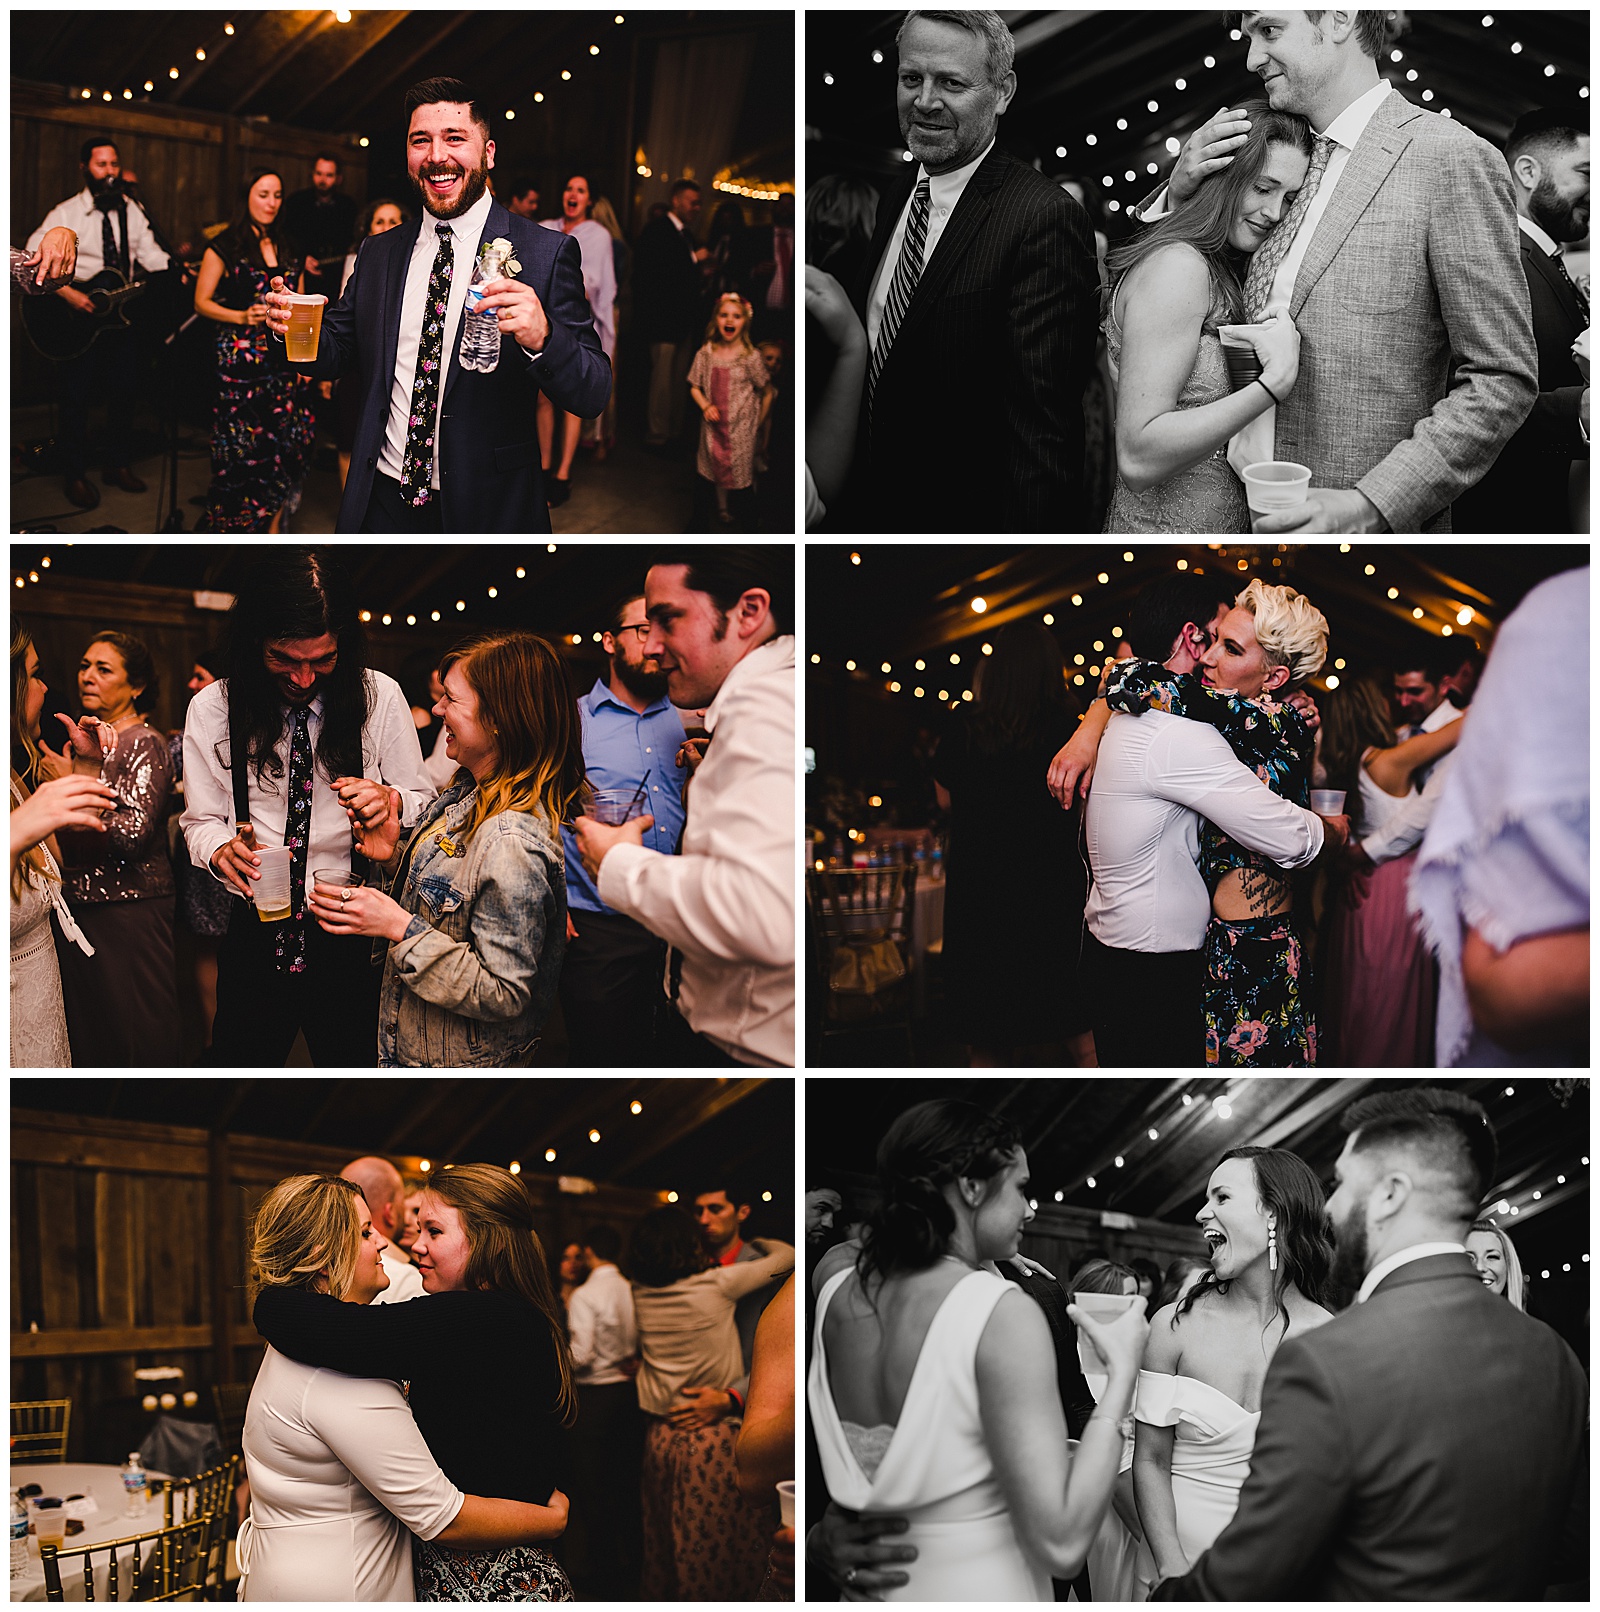 Guests dancing at the reception while the live wedding band plays. 